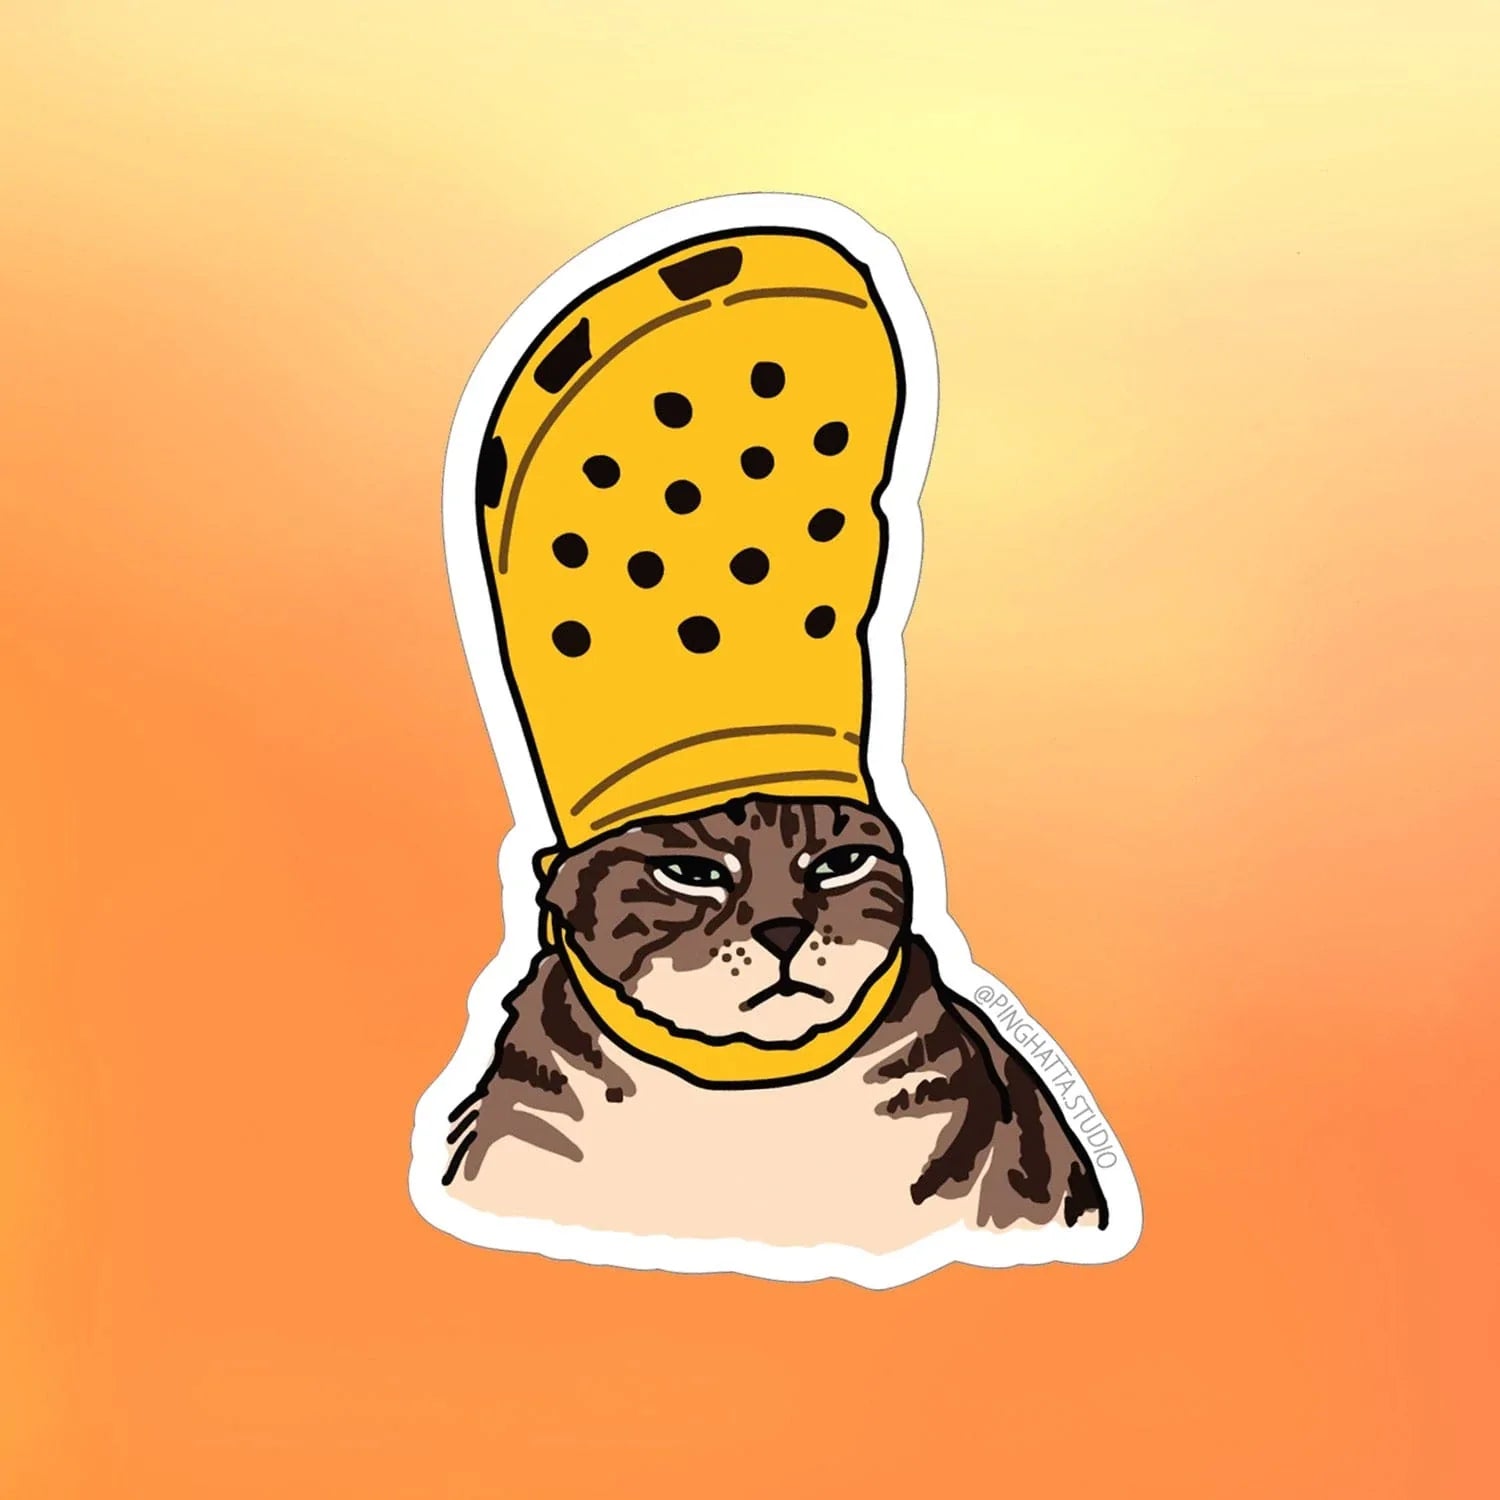 Croc Cat Sticker by artist Ping Hatta - features a yellow croc shoe on top of cats head as if it is a hat. Makes a cute gift!